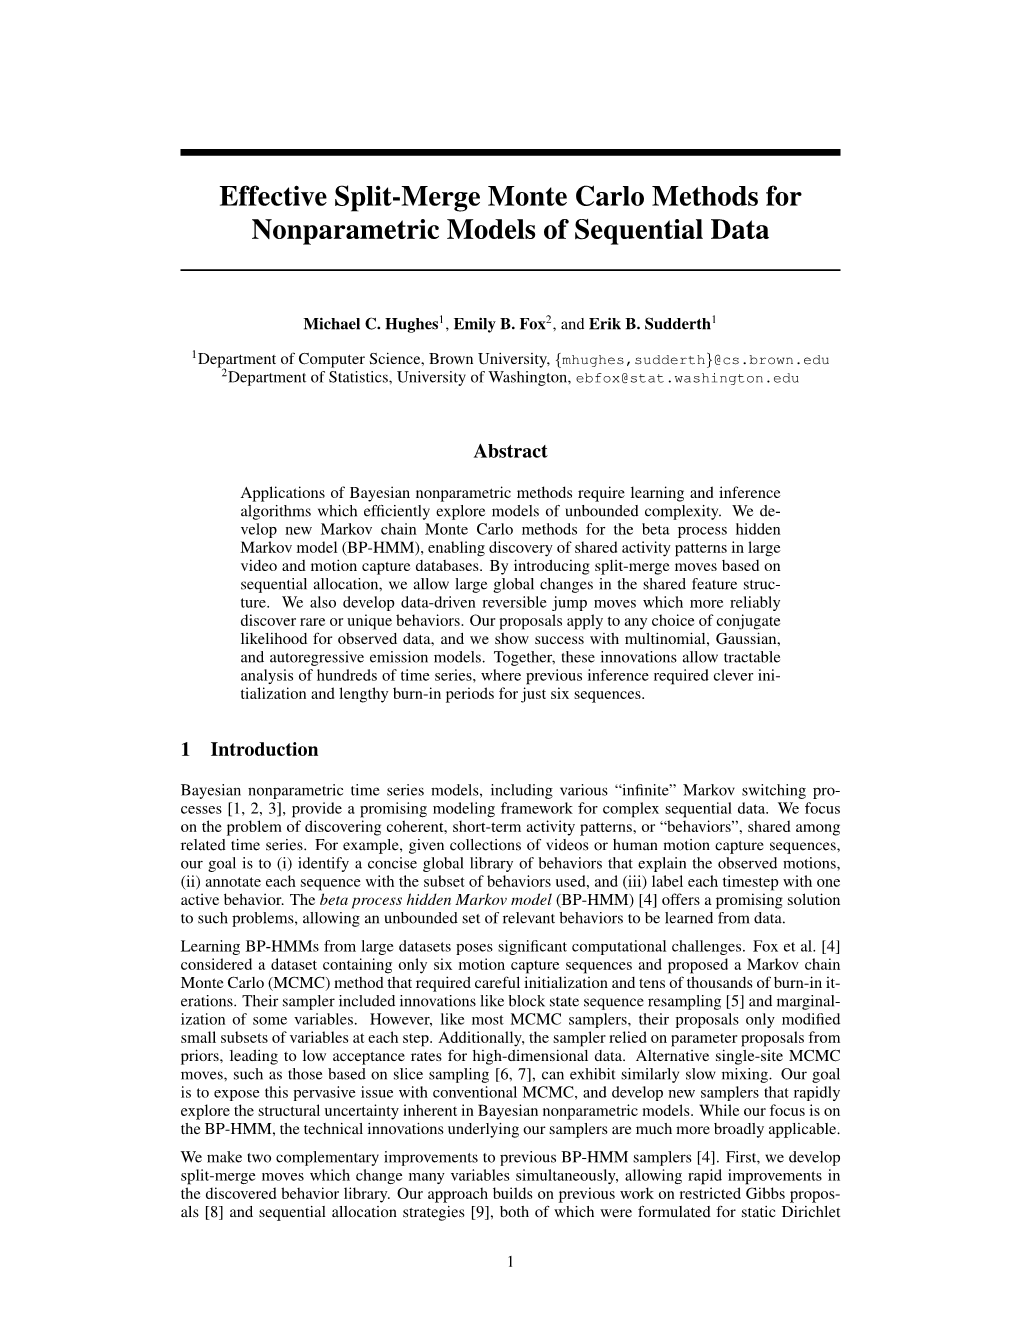 Effective Split-Merge Monte Carlo Methods for Nonparametric Models of Sequential Data